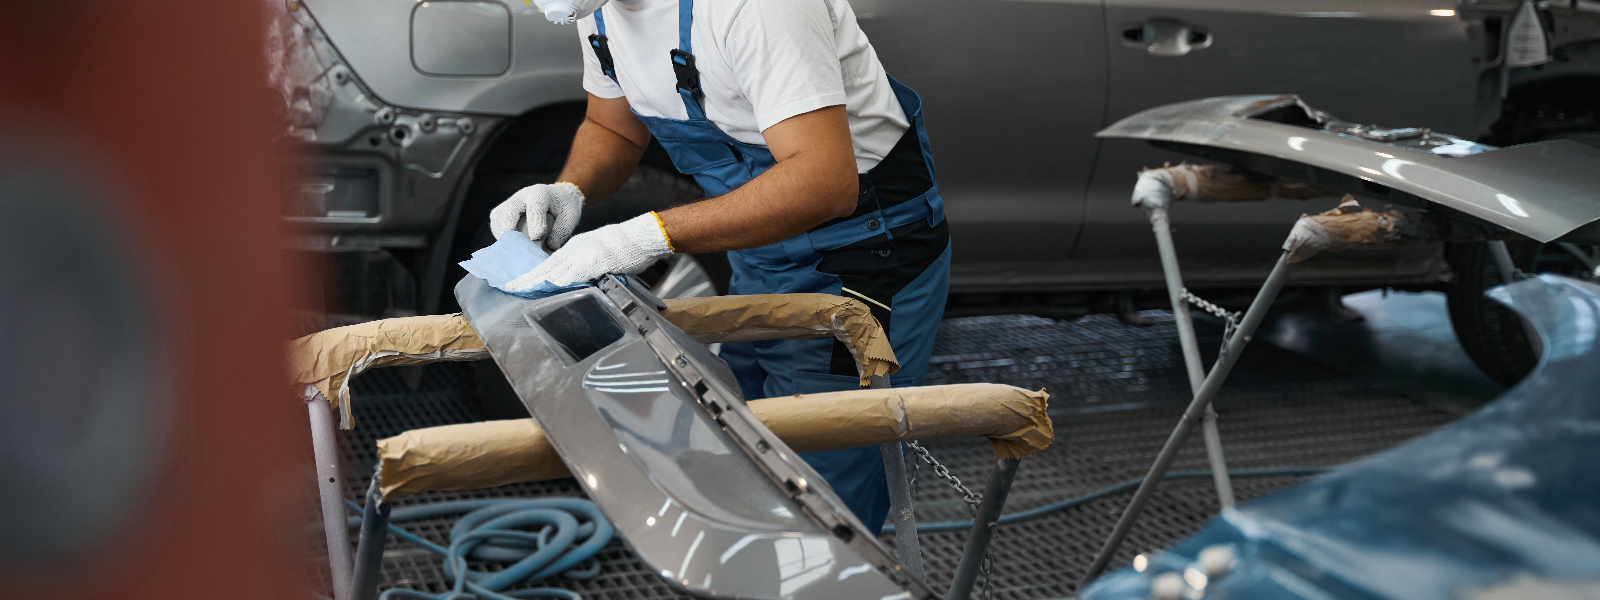 RABELIO INVEST OÜ - We specialize in car repair, maintenance, and bodywork, ensuring every vehicle is in peak condition.